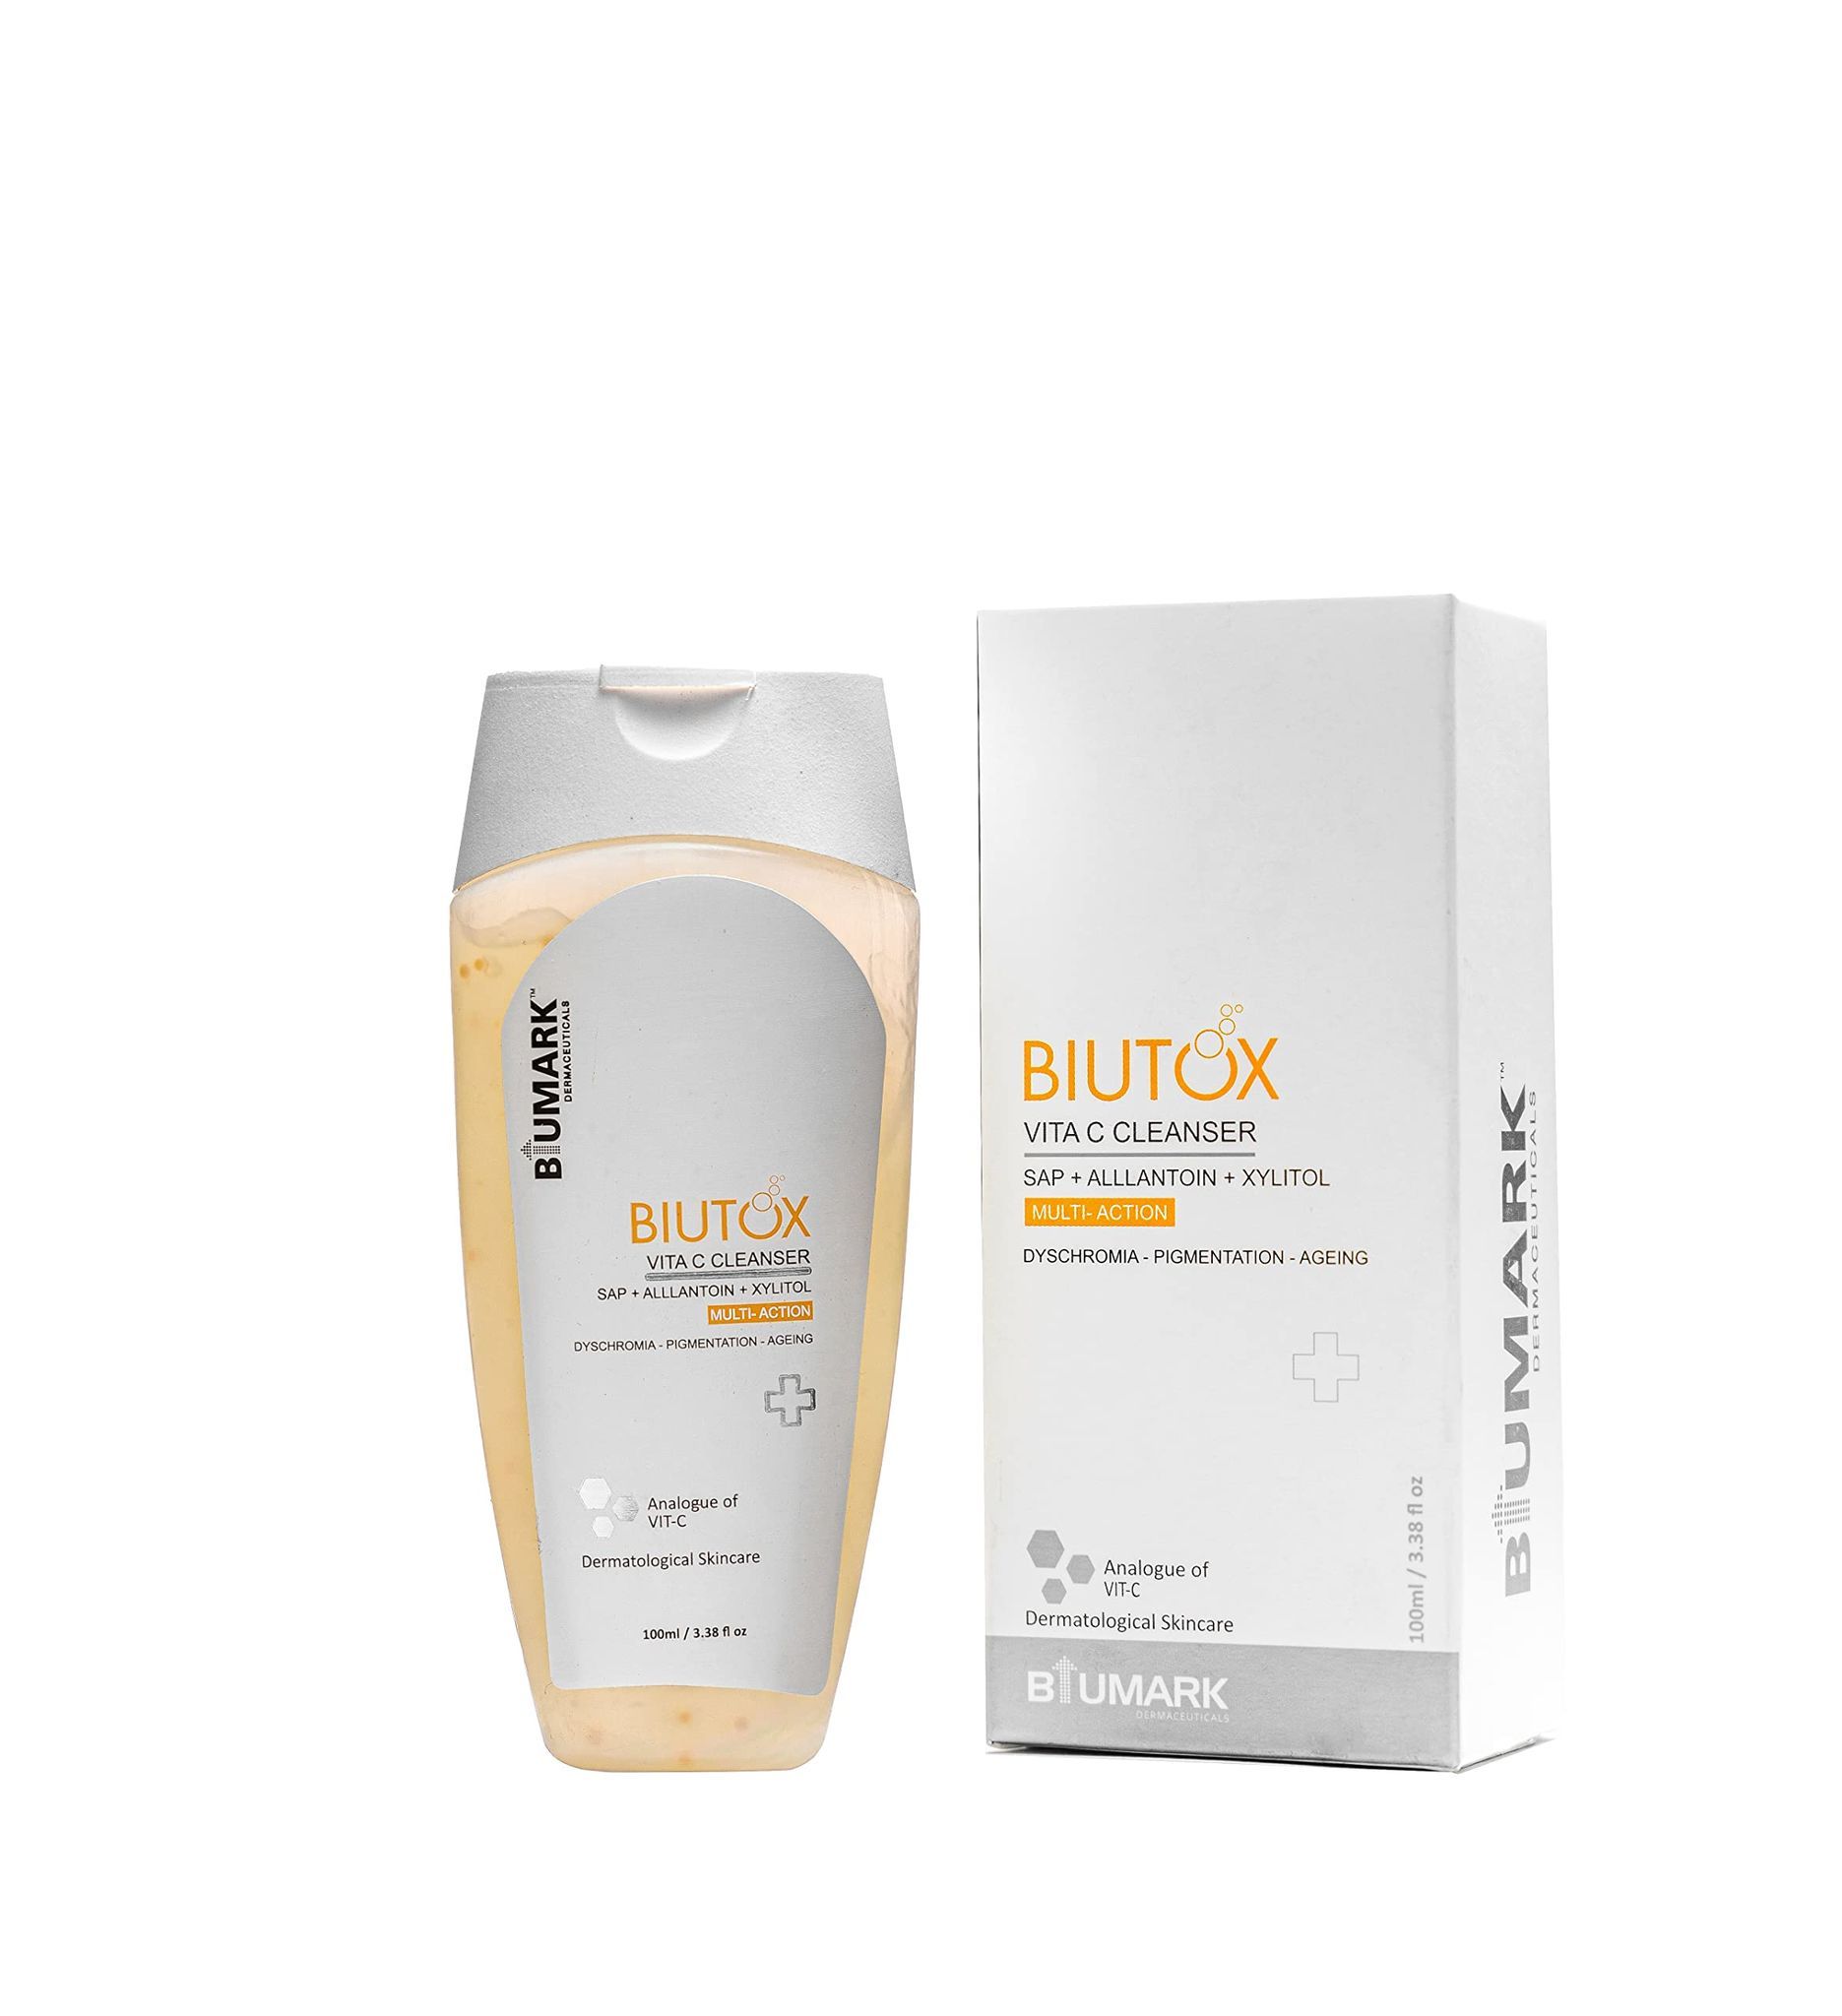 BIUMARK Biutox Vitamin C Face Cleanser for Glowing Skin | Cleanser for Everyday Use | Multitasking Face Cleanser| Suitable for All Skin Types (100 ml)